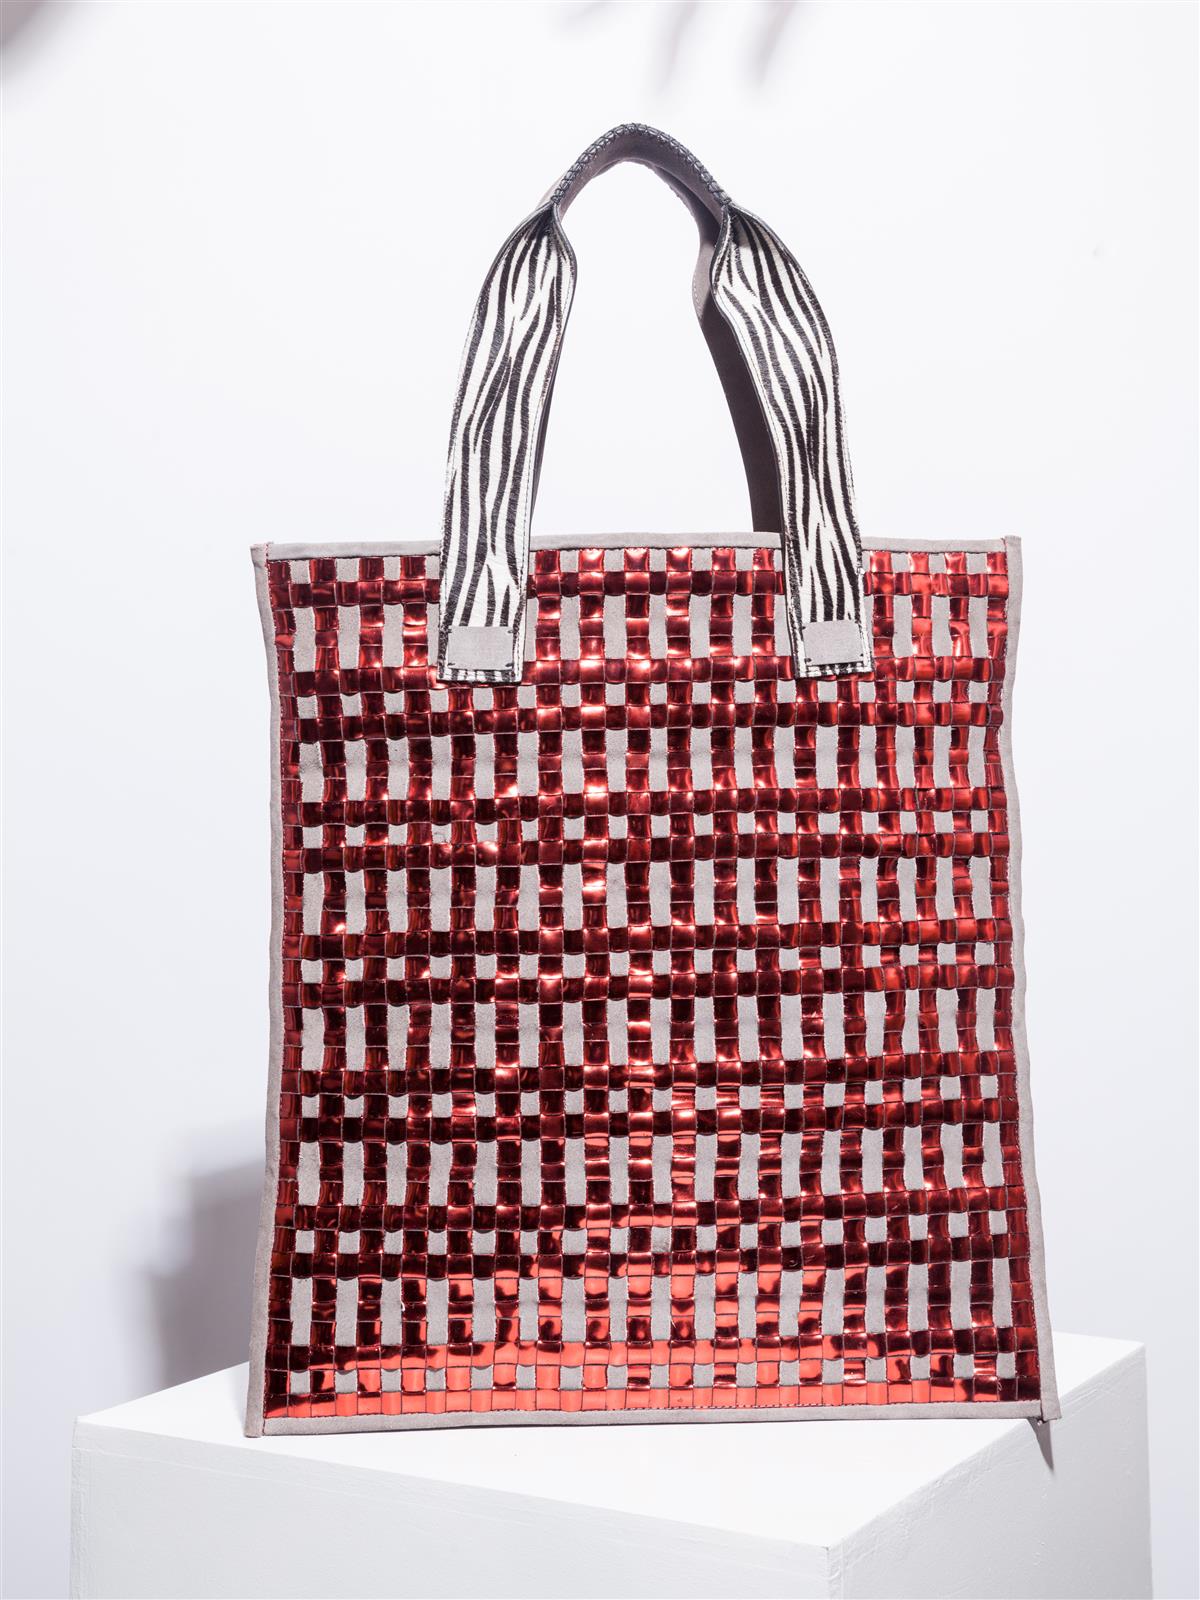 Stardust and mirror red tote with zebra details